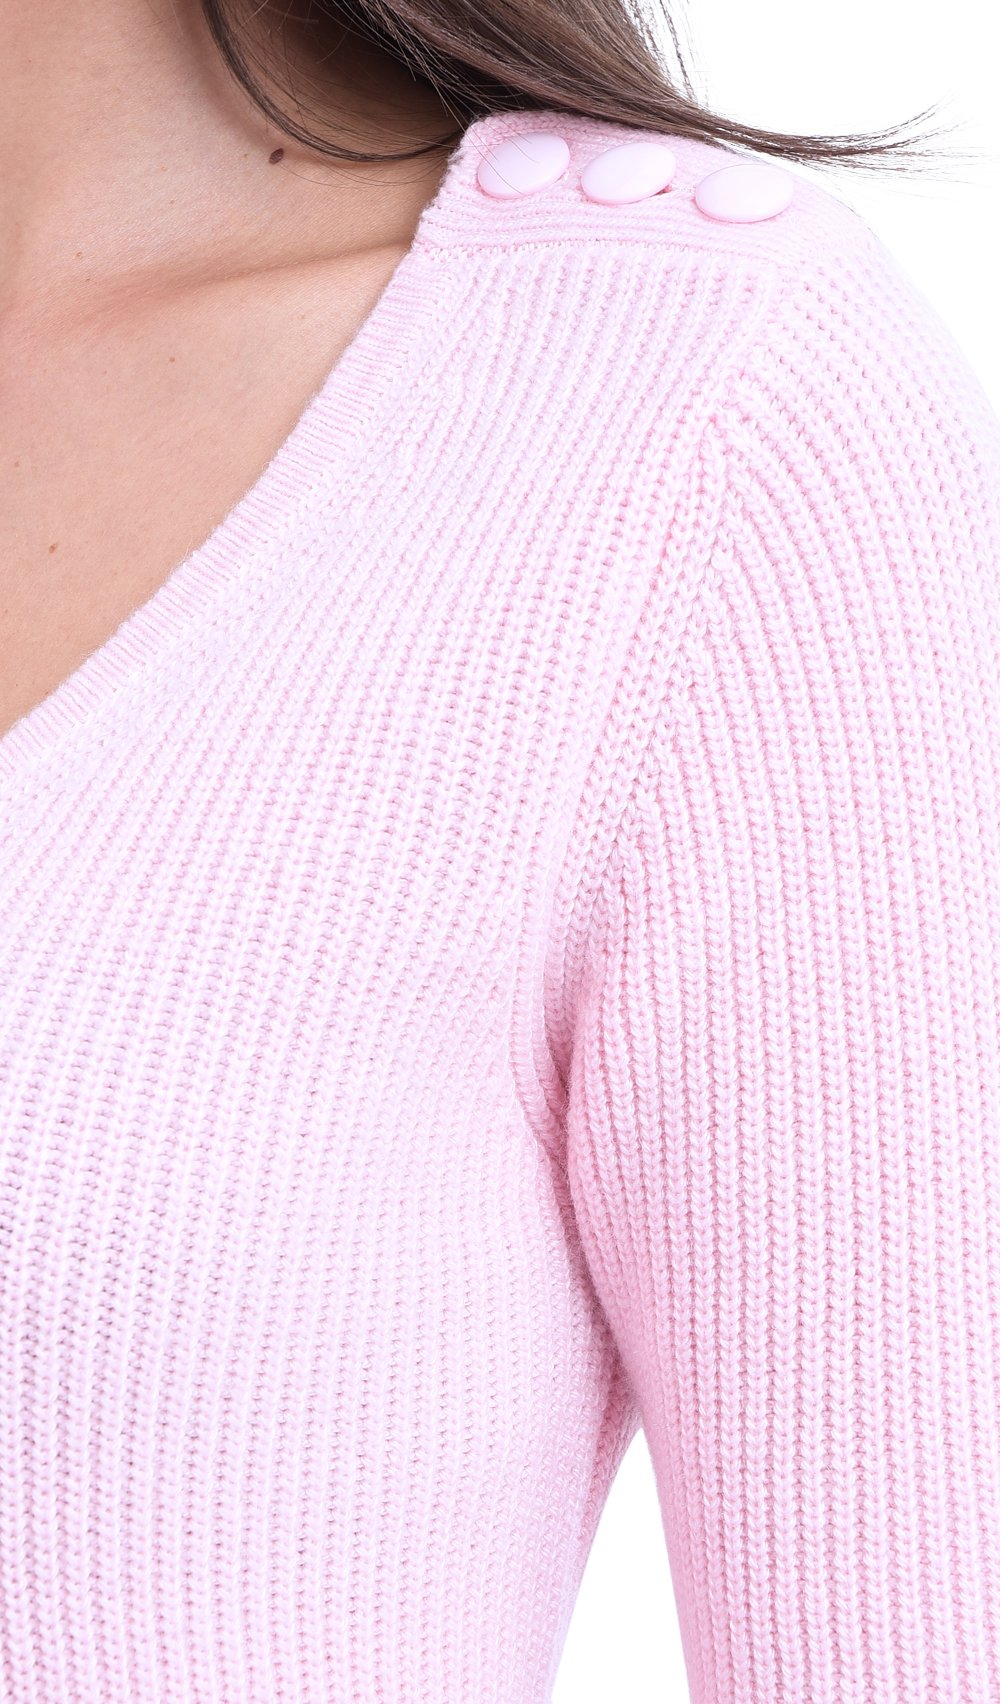 V-NECK SWEATER WITH BUTTONS ON SHOULDERS